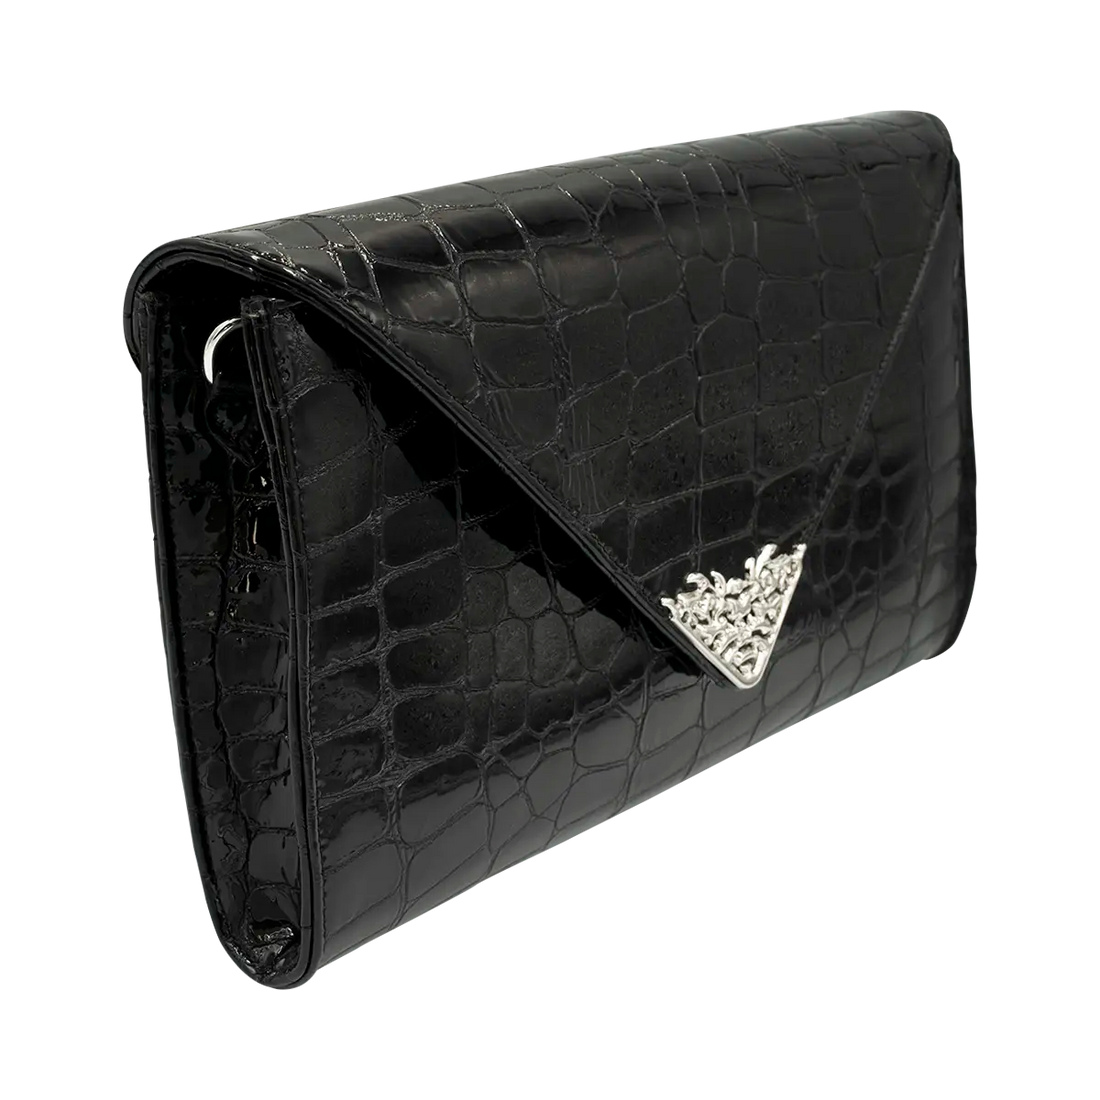 large black patent print leather clutch with strap. Fashion accessory for women in San Diego, CA.